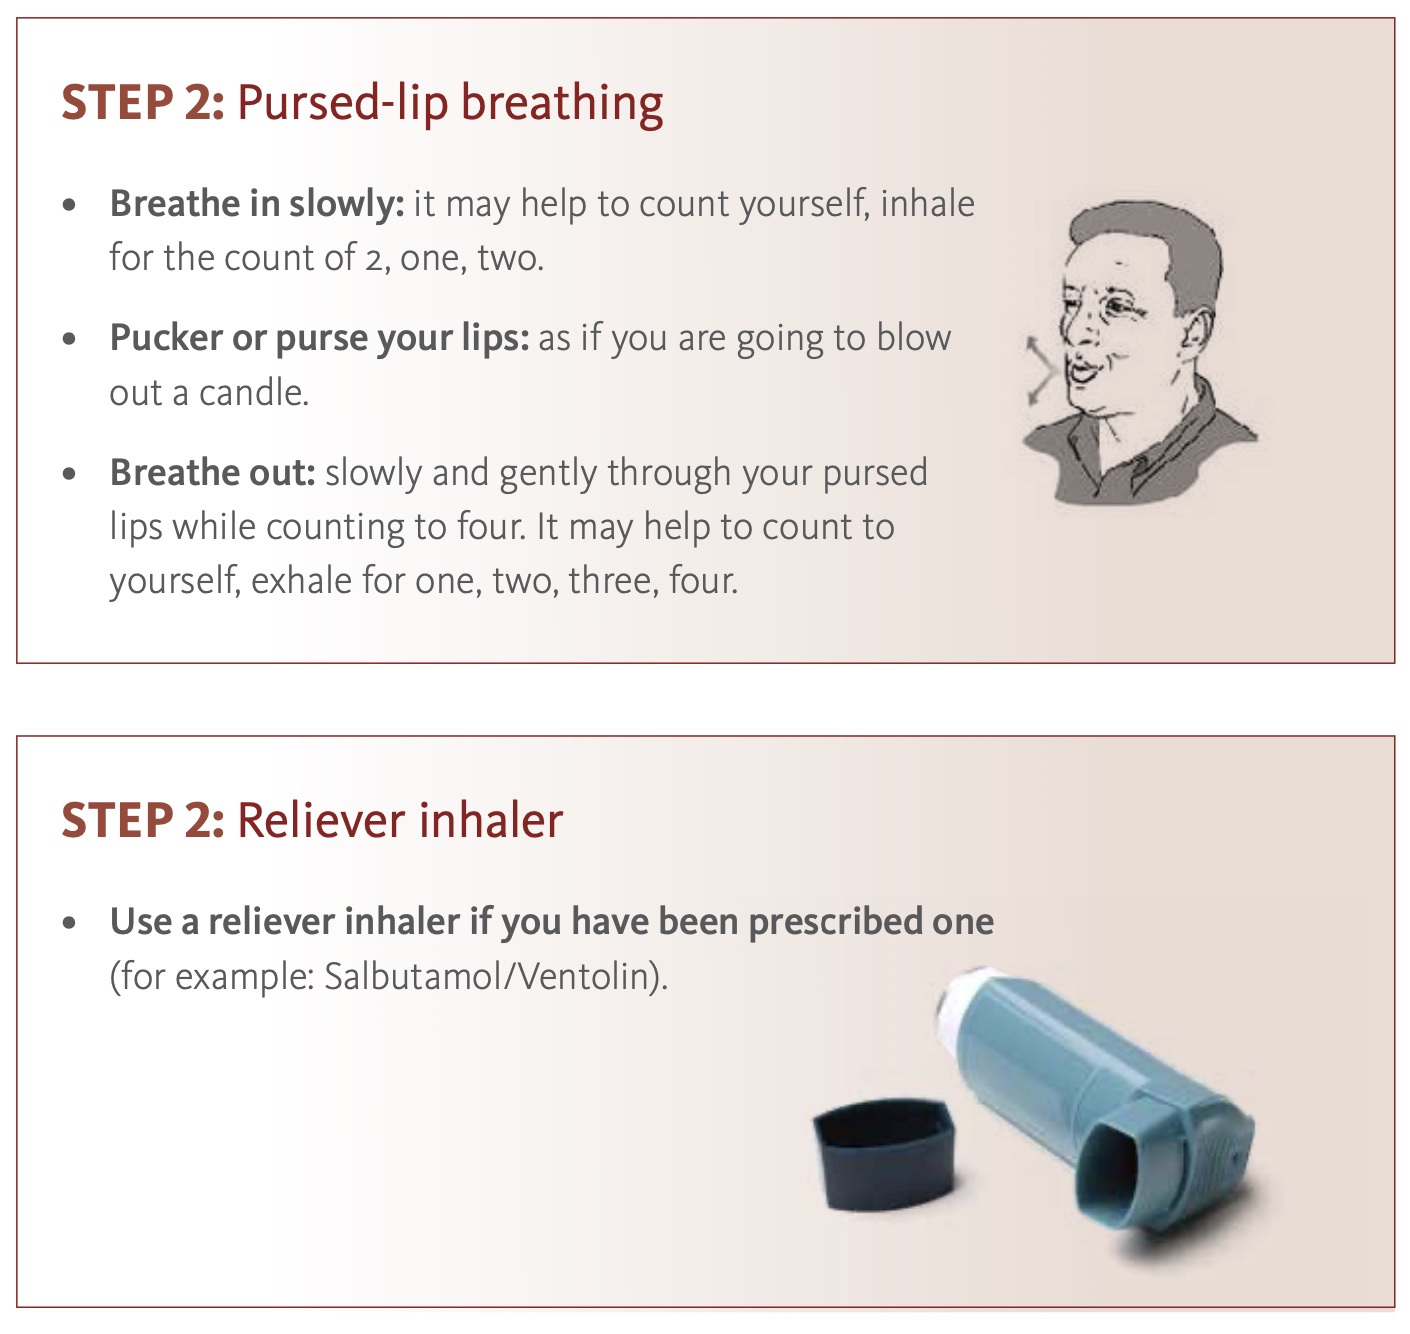 Pursed-lip breathing and breathing while bending forward | Cigna